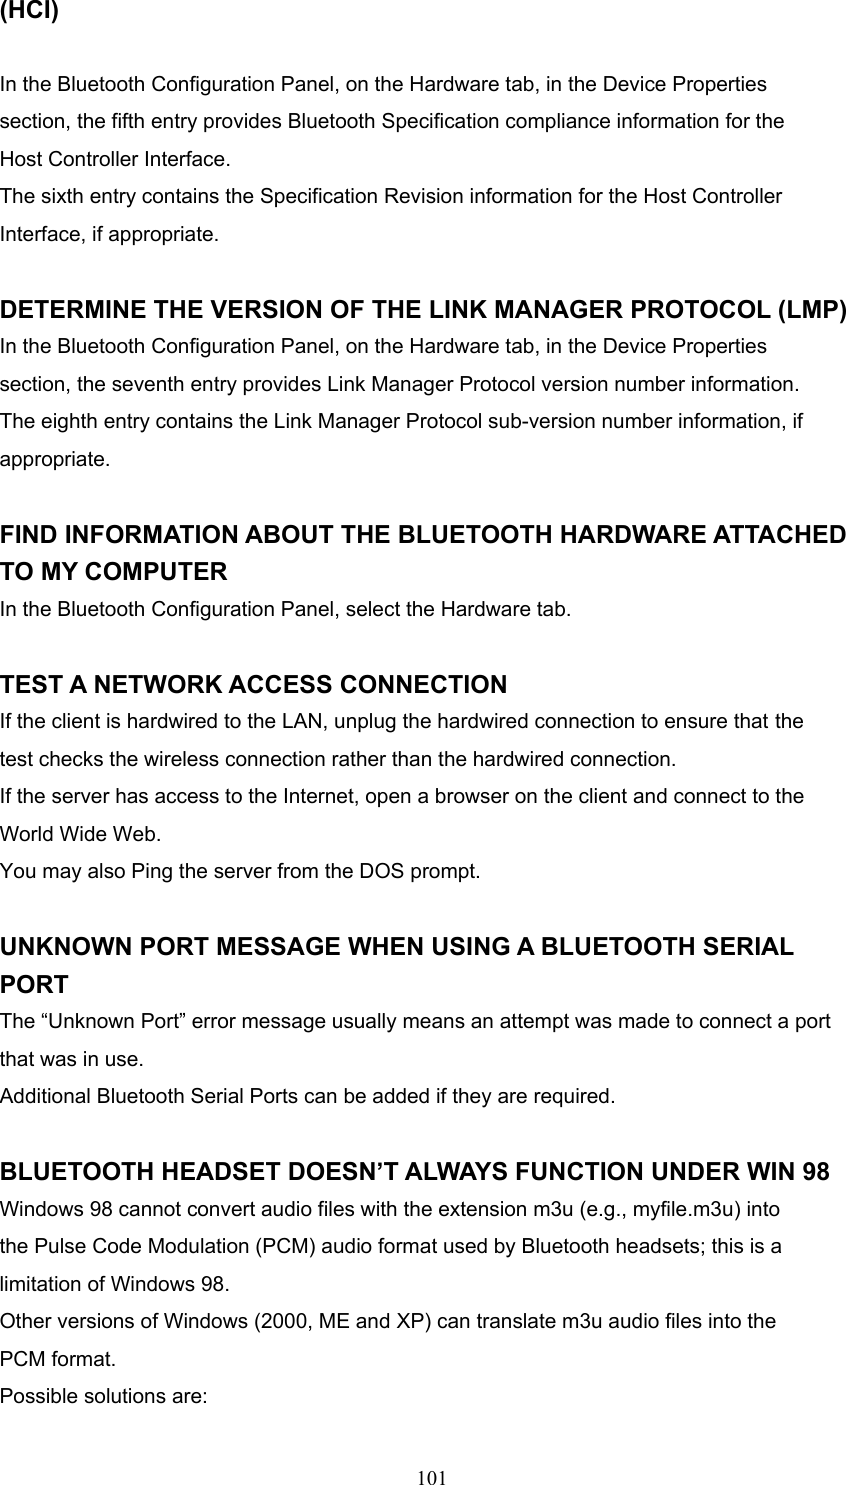  101 (HCI)  In the Bluetooth Configuration Panel, on the Hardware tab, in the Device Properties section, the fifth entry provides Bluetooth Specification compliance information for the Host Controller Interface. The sixth entry contains the Specification Revision information for the Host Controller Interface, if appropriate.  DETERMINE THE VERSION OF THE LINK MANAGER PROTOCOL (LMP) In the Bluetooth Configuration Panel, on the Hardware tab, in the Device Properties section, the seventh entry provides Link Manager Protocol version number information. The eighth entry contains the Link Manager Protocol sub-version number information, if appropriate.  FIND INFORMATION ABOUT THE BLUETOOTH HARDWARE ATTACHED TO MY COMPUTER In the Bluetooth Configuration Panel, select the Hardware tab.  TEST A NETWORK ACCESS CONNECTION If the client is hardwired to the LAN, unplug the hardwired connection to ensure that the test checks the wireless connection rather than the hardwired connection. If the server has access to the Internet, open a browser on the client and connect to the World Wide Web. You may also Ping the server from the DOS prompt.  UNKNOWN PORT MESSAGE WHEN USING A BLUETOOTH SERIAL PORT The “Unknown Port” error message usually means an attempt was made to connect a port that was in use. Additional Bluetooth Serial Ports can be added if they are required.  BLUETOOTH HEADSET DOESN’T ALWAYS FUNCTION UNDER WIN 98 Windows 98 cannot convert audio files with the extension m3u (e.g., myfile.m3u) into the Pulse Code Modulation (PCM) audio format used by Bluetooth headsets; this is a limitation of Windows 98. Other versions of Windows (2000, ME and XP) can translate m3u audio files into the PCM format. Possible solutions are: 